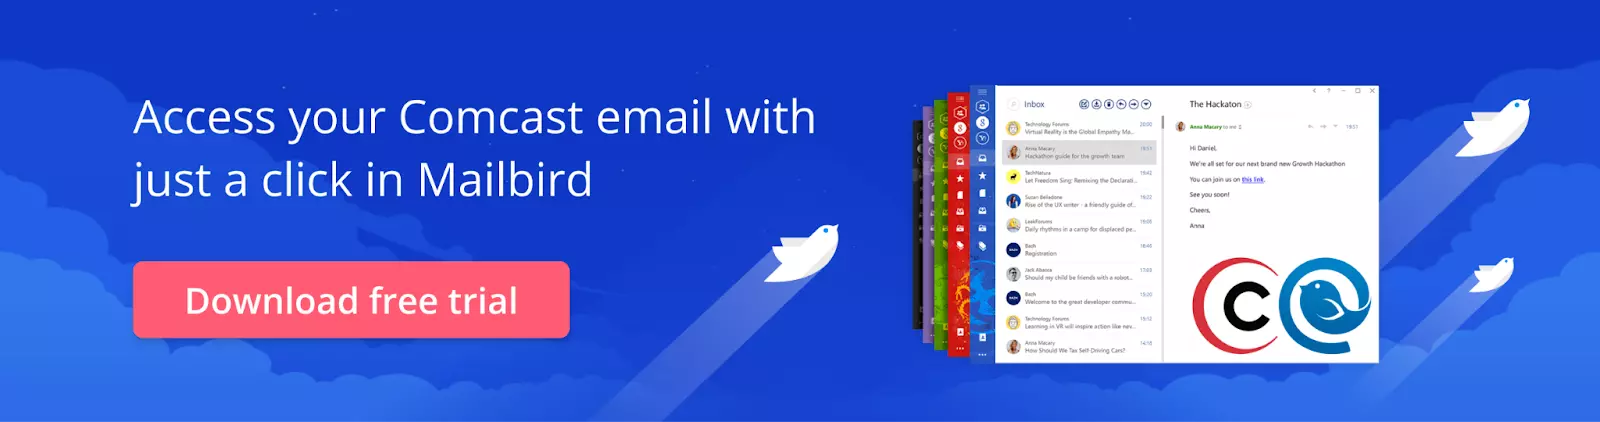 Banner about integrating Comcast email with Mailbird